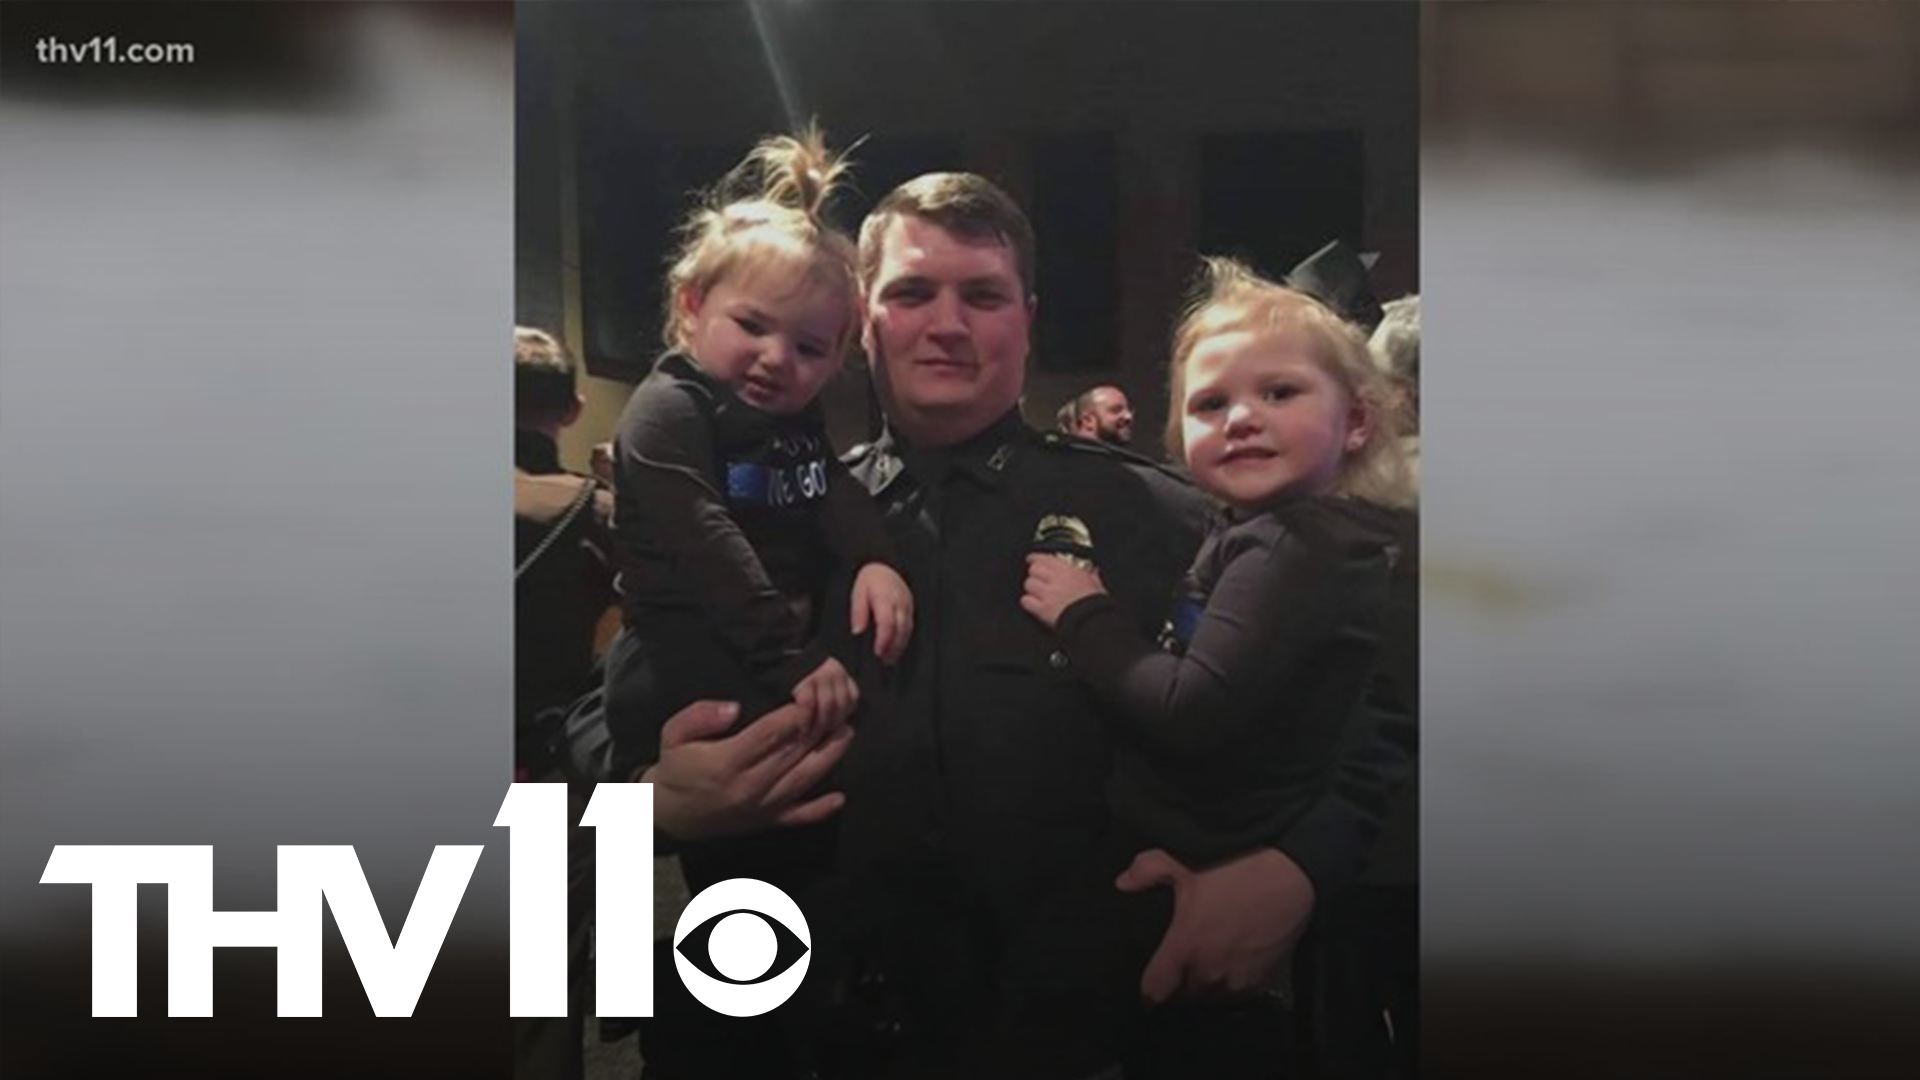 A Lonoke police officer shot in the line of duty over the weekend is expected to make a full recovery. But this shooting has left his colleagues very shaken up.